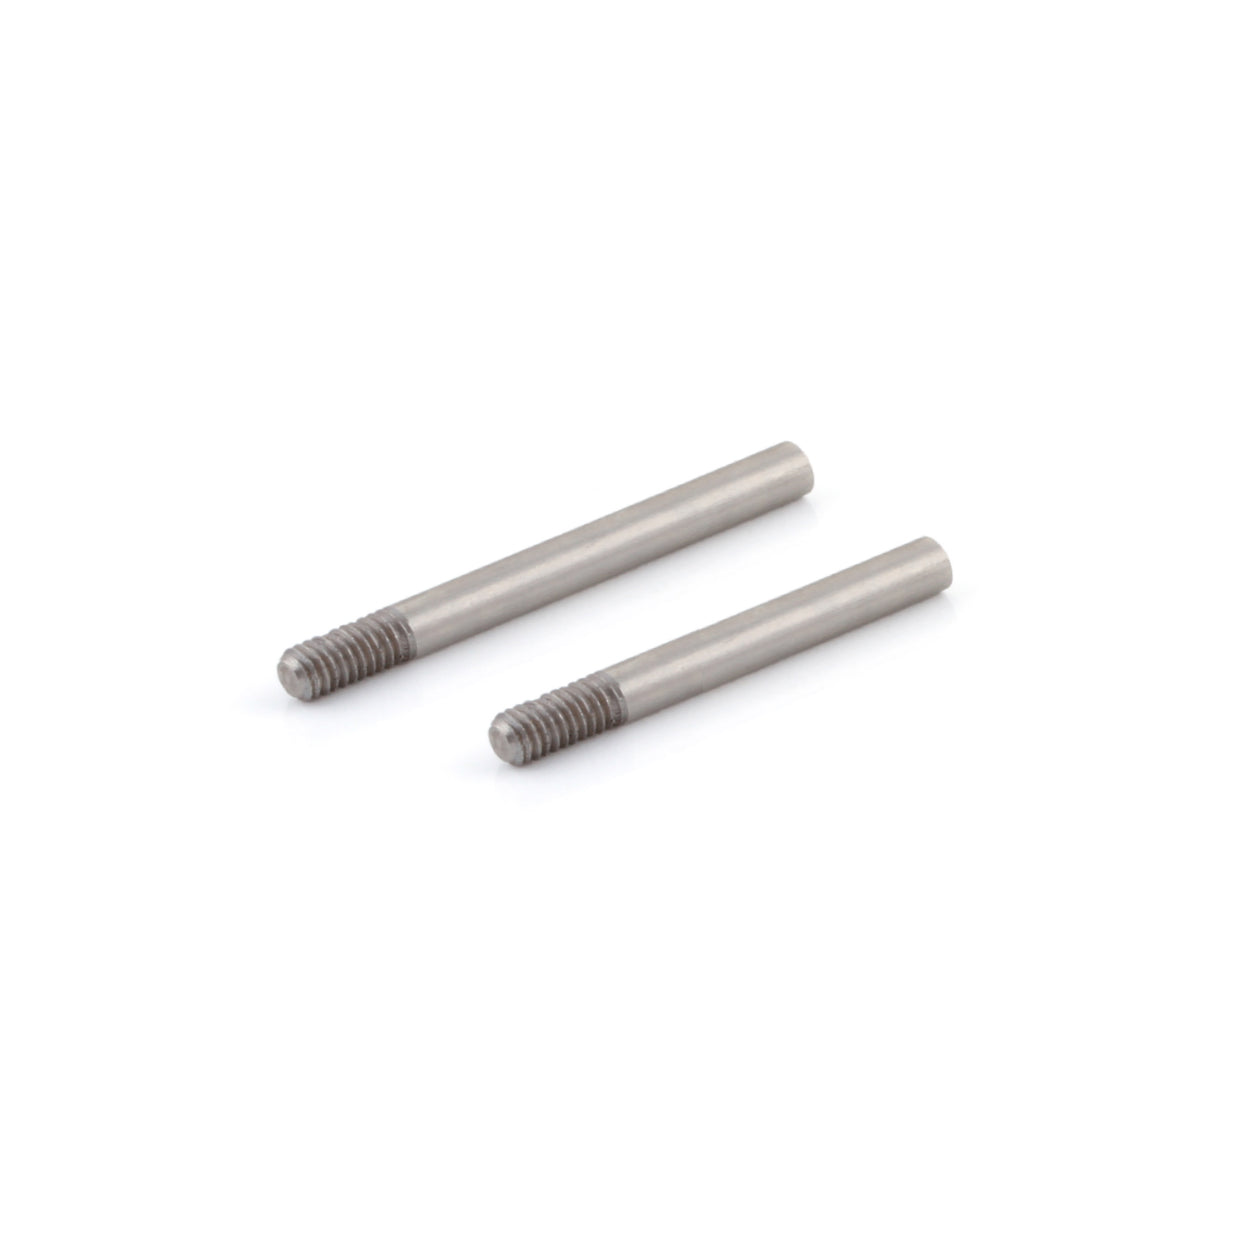 Stainless Steel Handle Pins